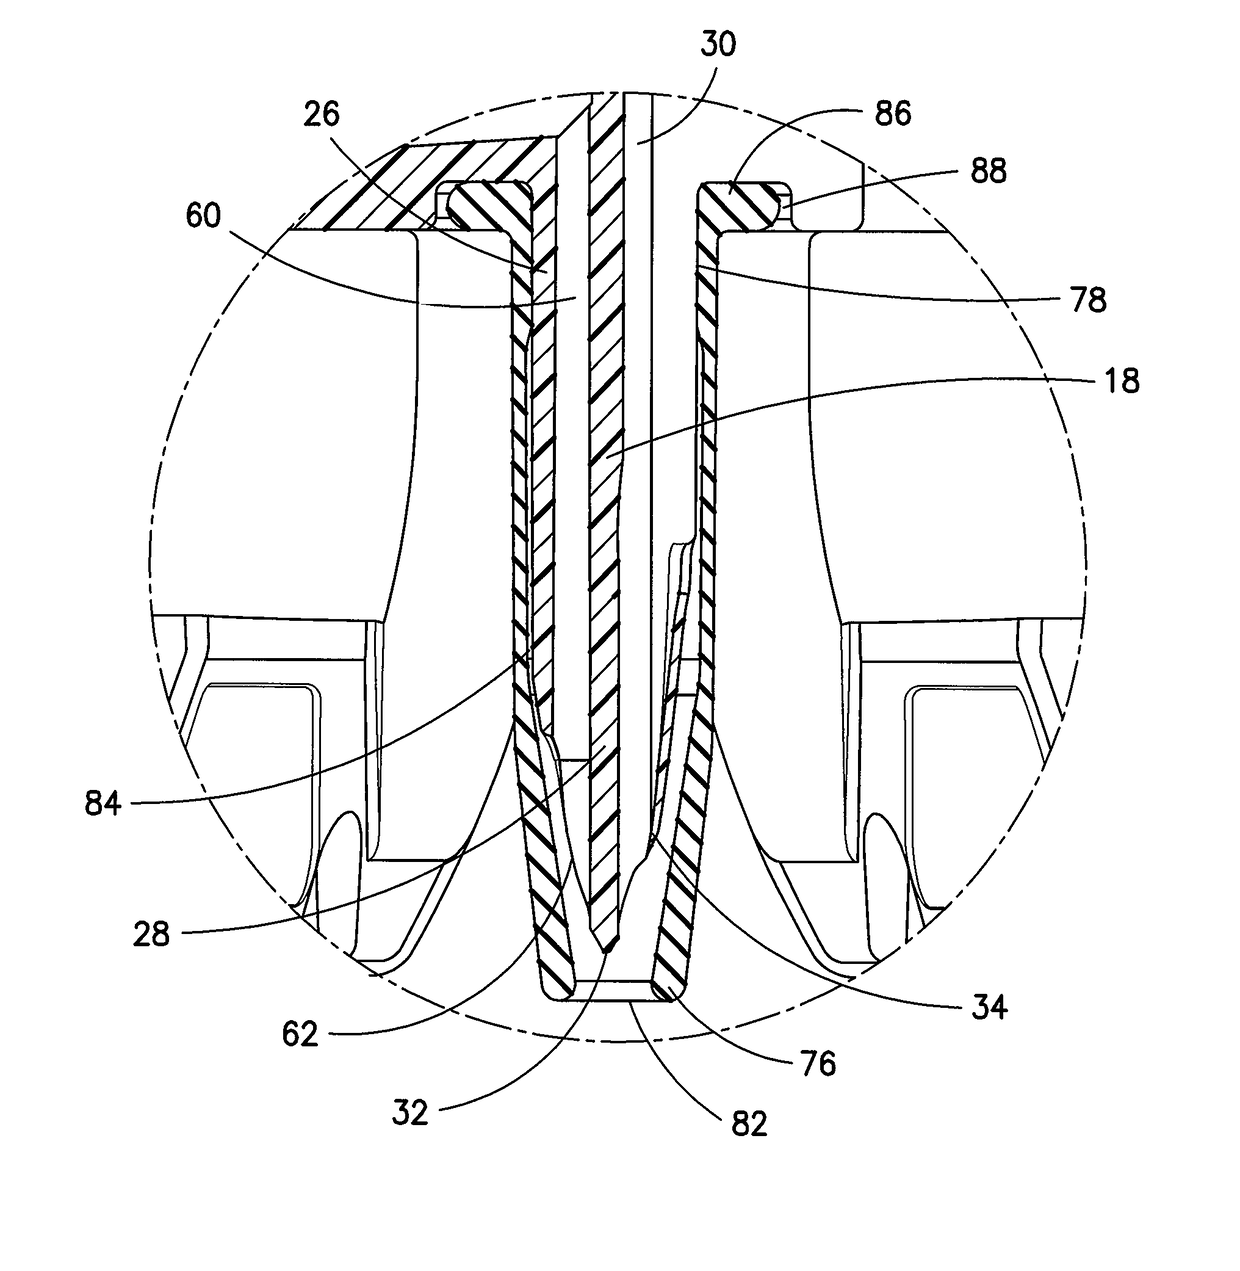 Piercing member for container access device